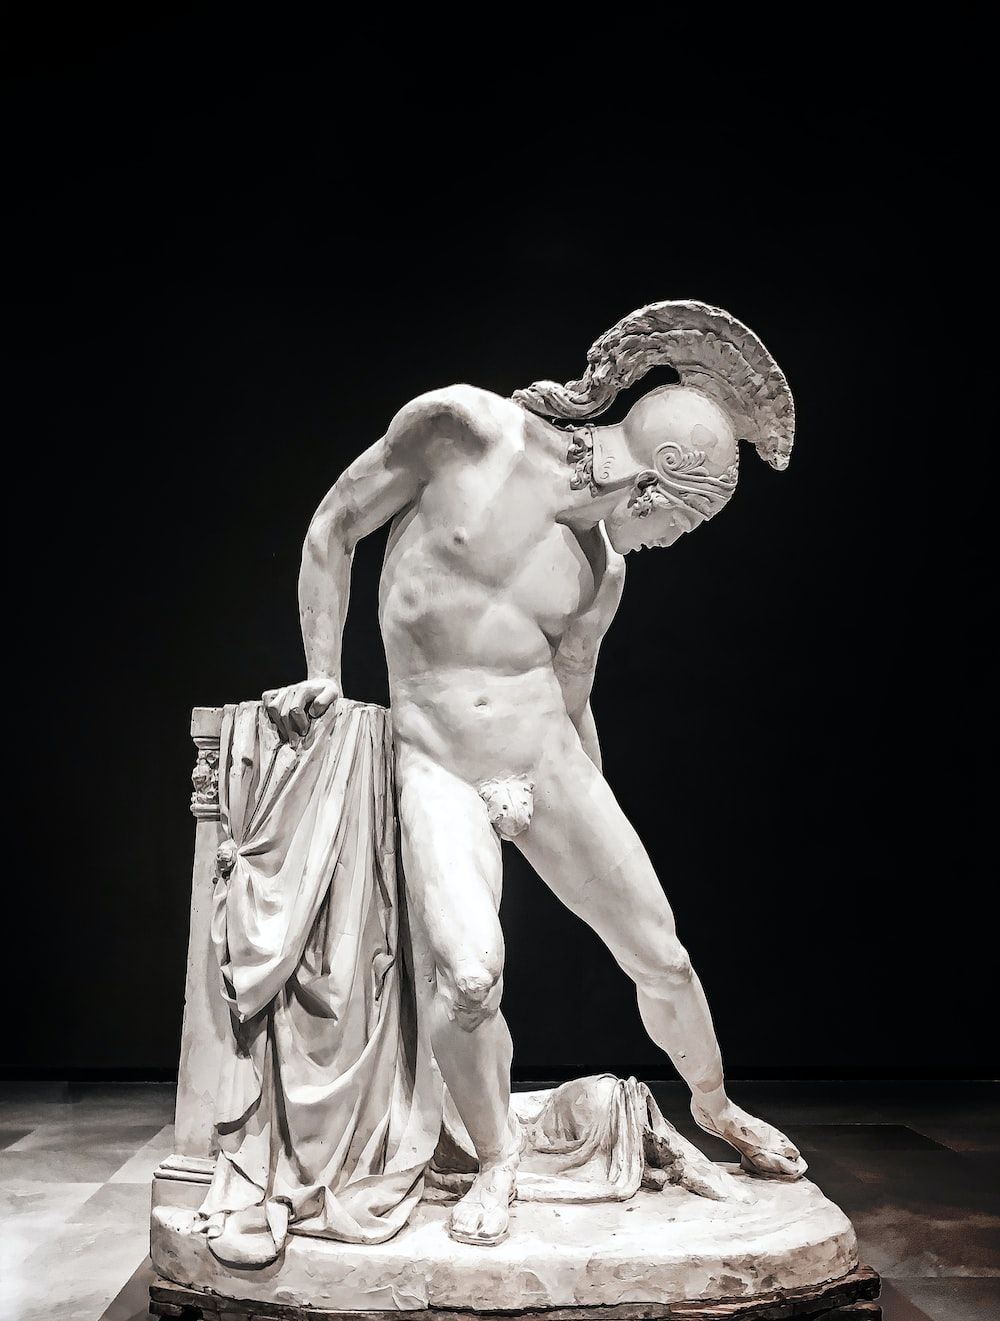 Greek Statues Picture. Download Free Image